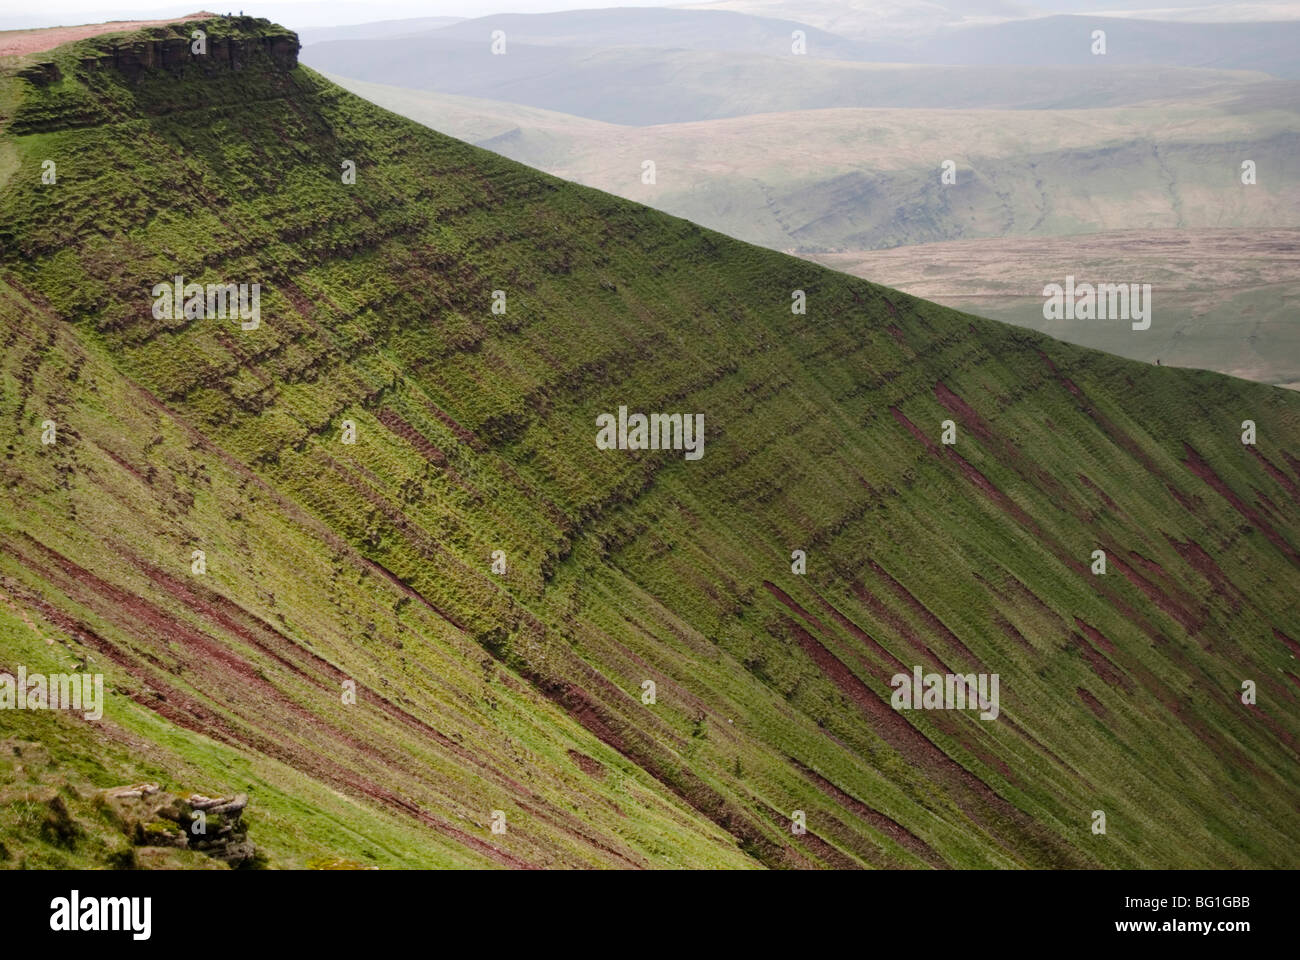 Corn Du, in the Brecon Beacons in Wales Stock Photo